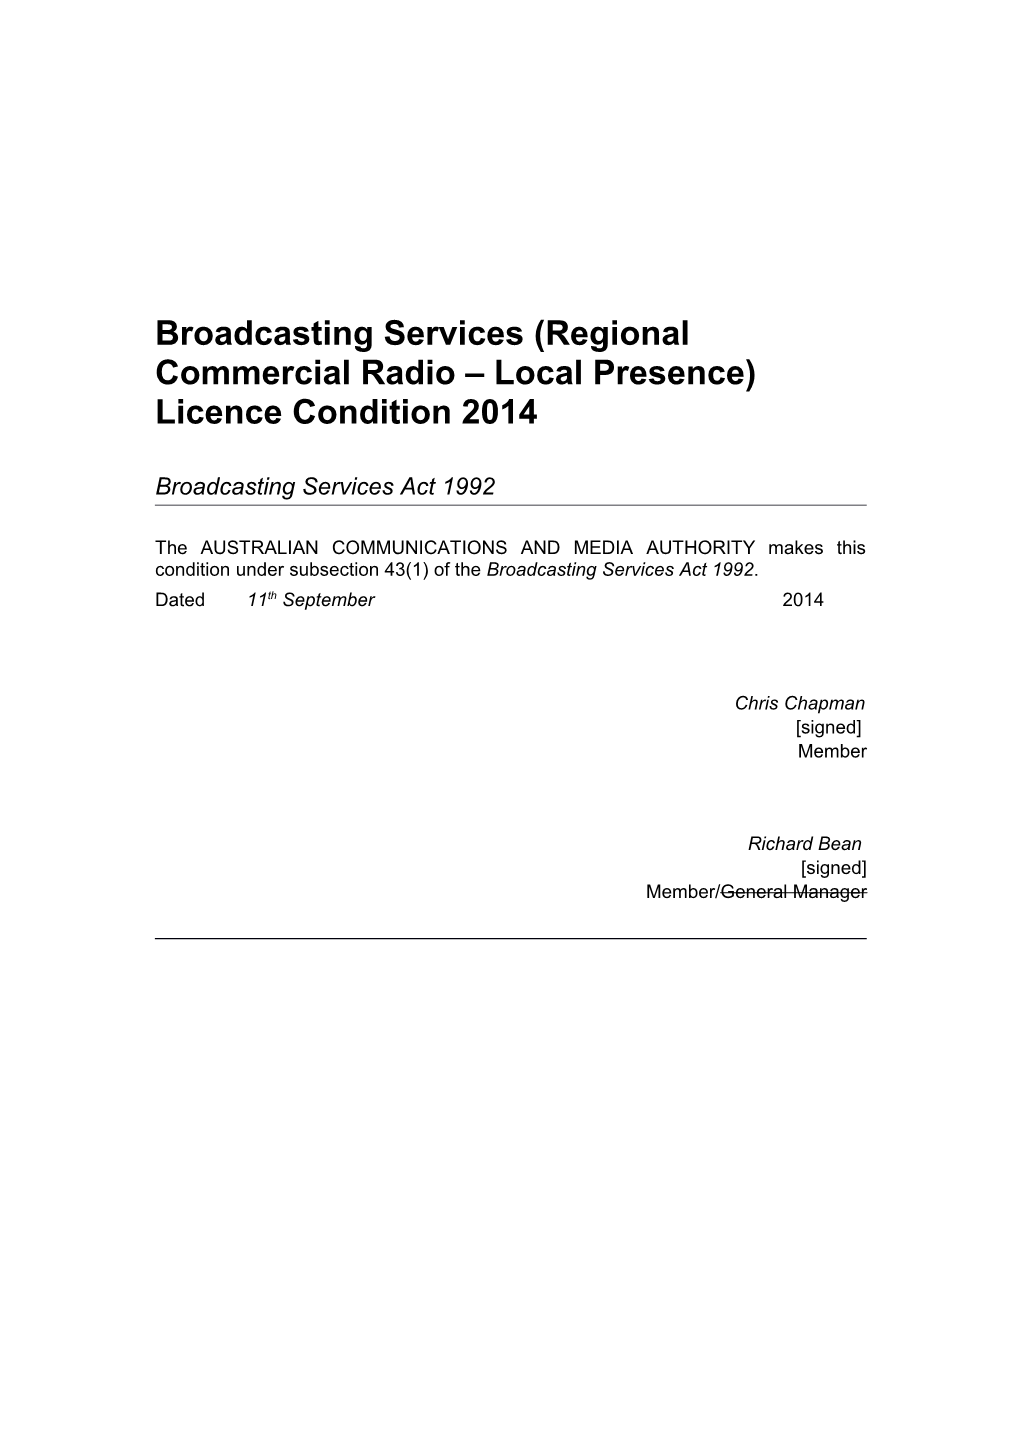 Broadcasting Services (Regional Commercial Radio Local Presence) Licence Condition 2012